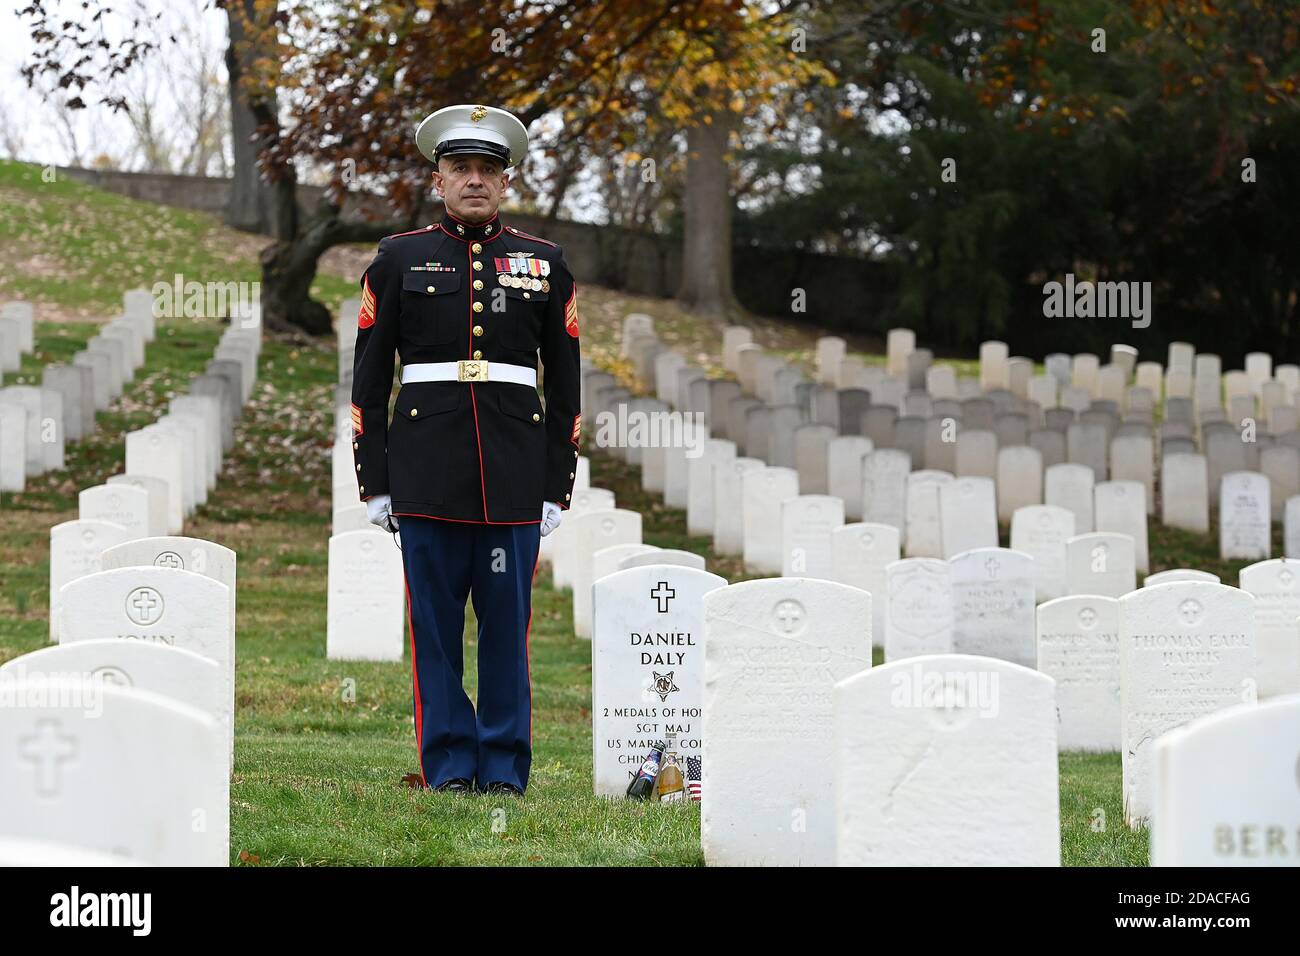 Former US Marine Albert Grajales stands at attention beside the headstone of honored United States Marine Daniel Dal (1837-1937), at Cypress Hills National Cemetery in the Brooklyn borough of New York, NY, on November 11, 2020. Mr. Grajales who also served in the Army and in the Air Force reserves, makes an annual pilgrimage to Cypress Hills National Cemetery on Veterans Day in memory of those lost in combat; United States Marine Daniel Daly is one of only two Marines to have received the Medal of Honor twice for two different actions. (Anthony Behar/Sipa USA) Stock Photo